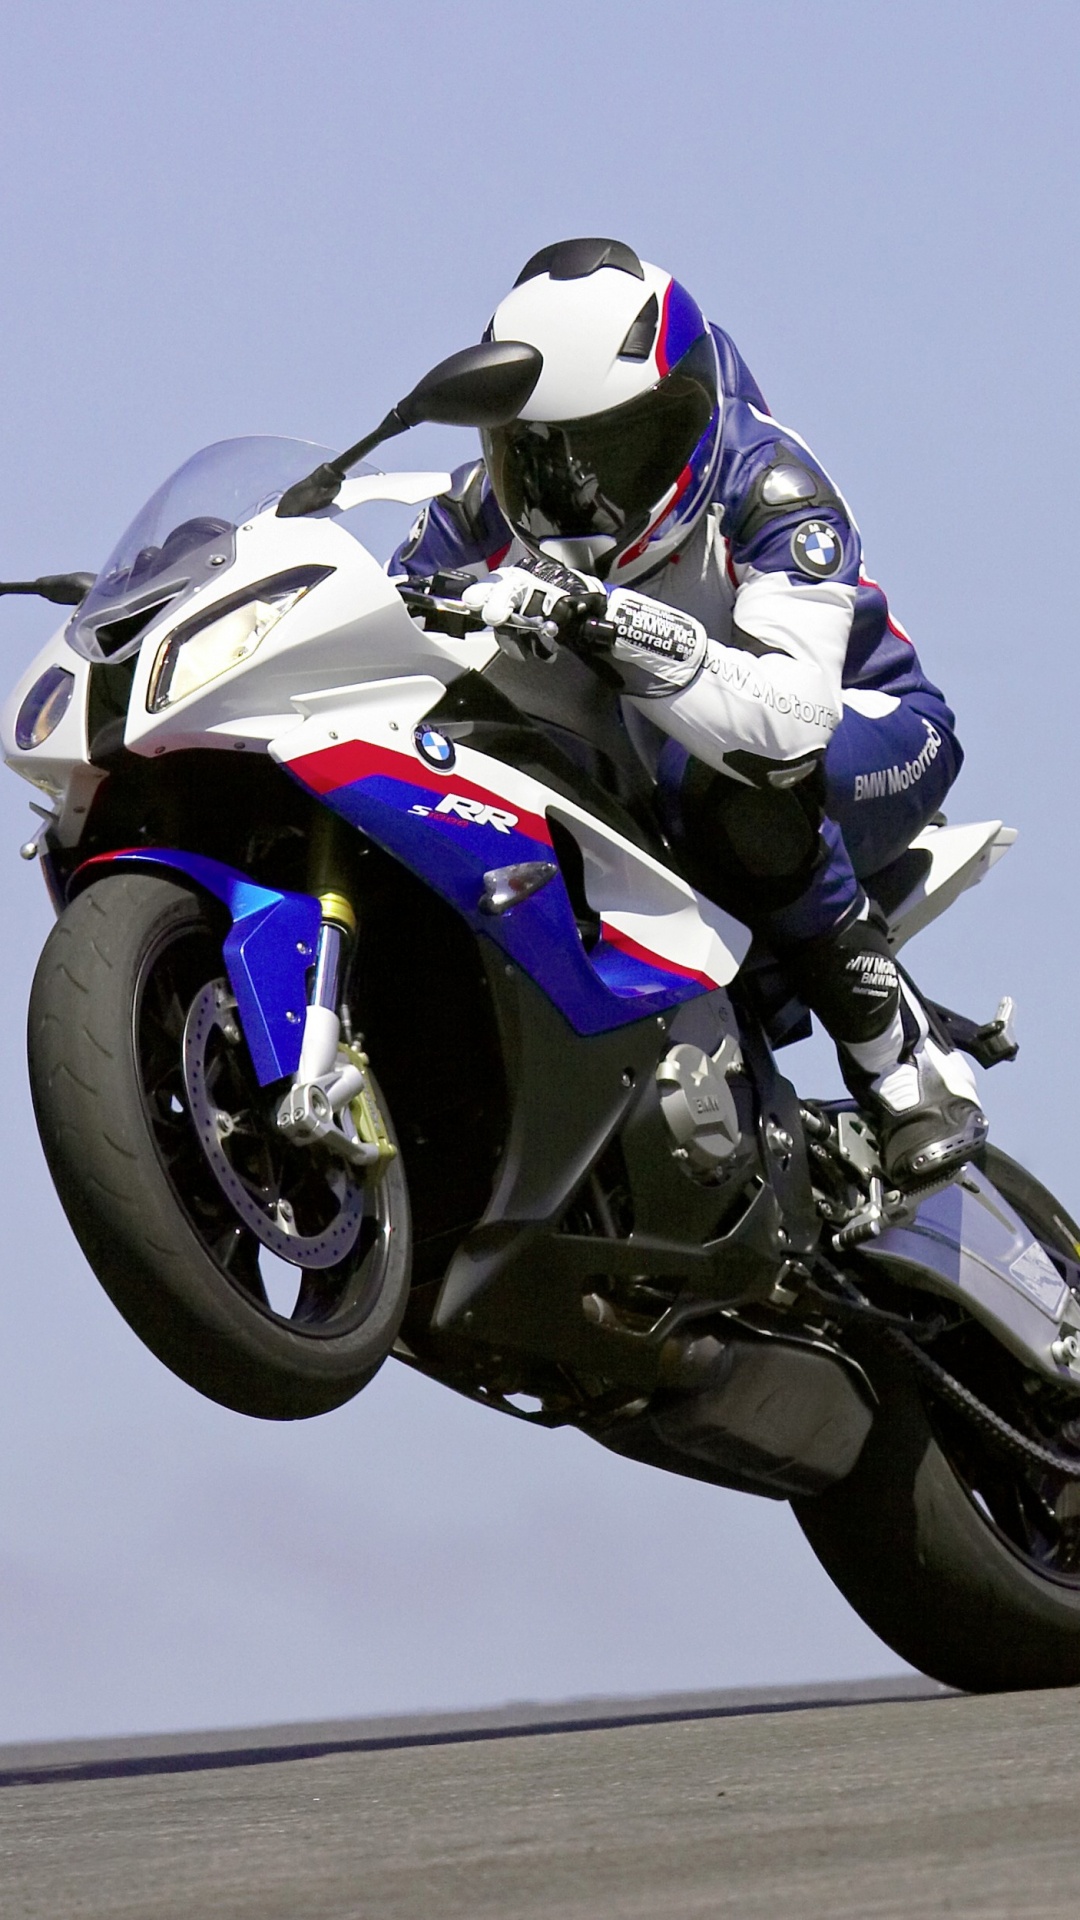 Man in White and Black Motorcycle Helmet Riding White and Black Sports Bike. Wallpaper in 1080x1920 Resolution